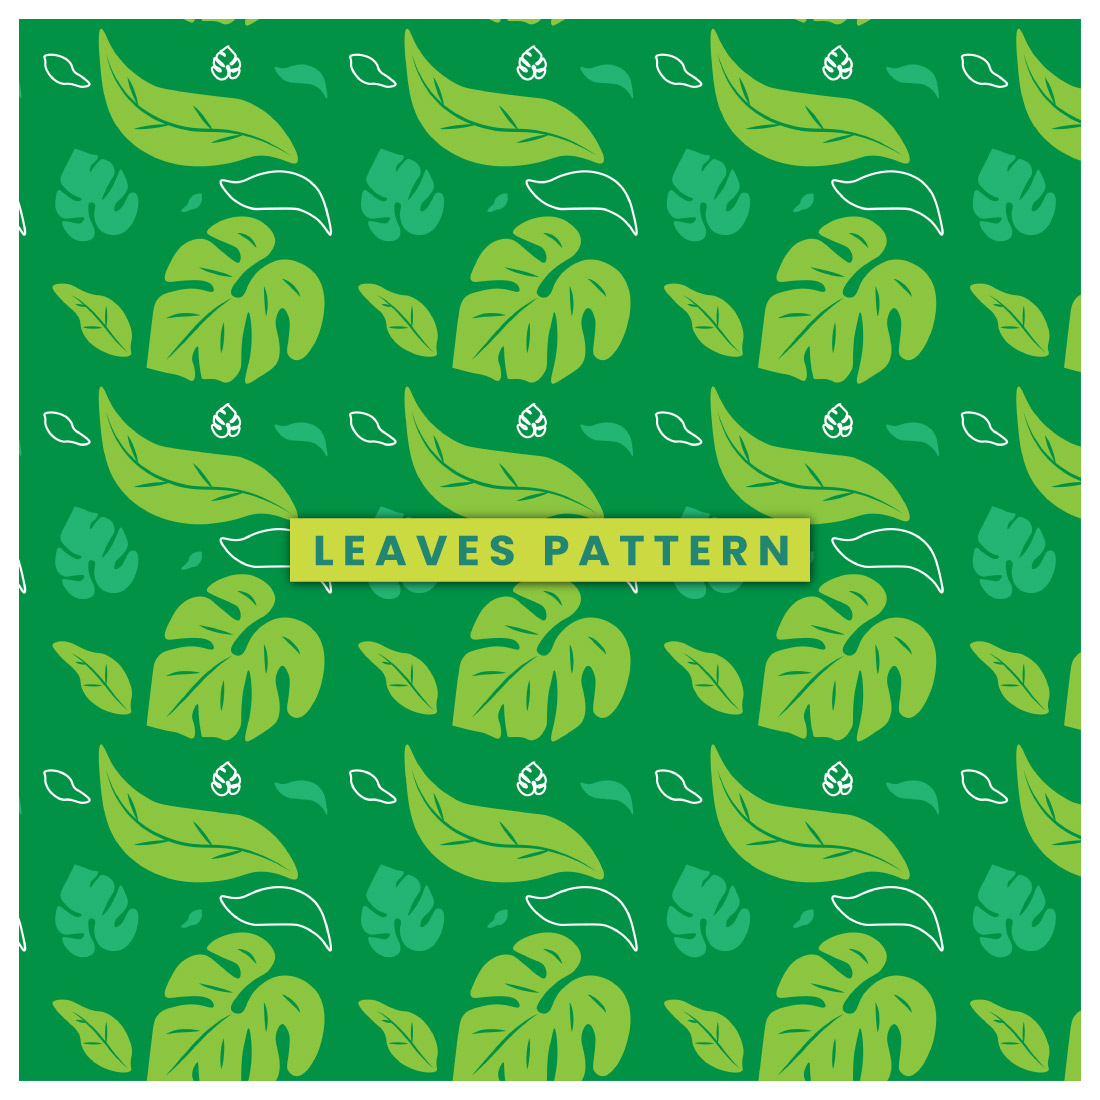 Leaves Pattern main cover.